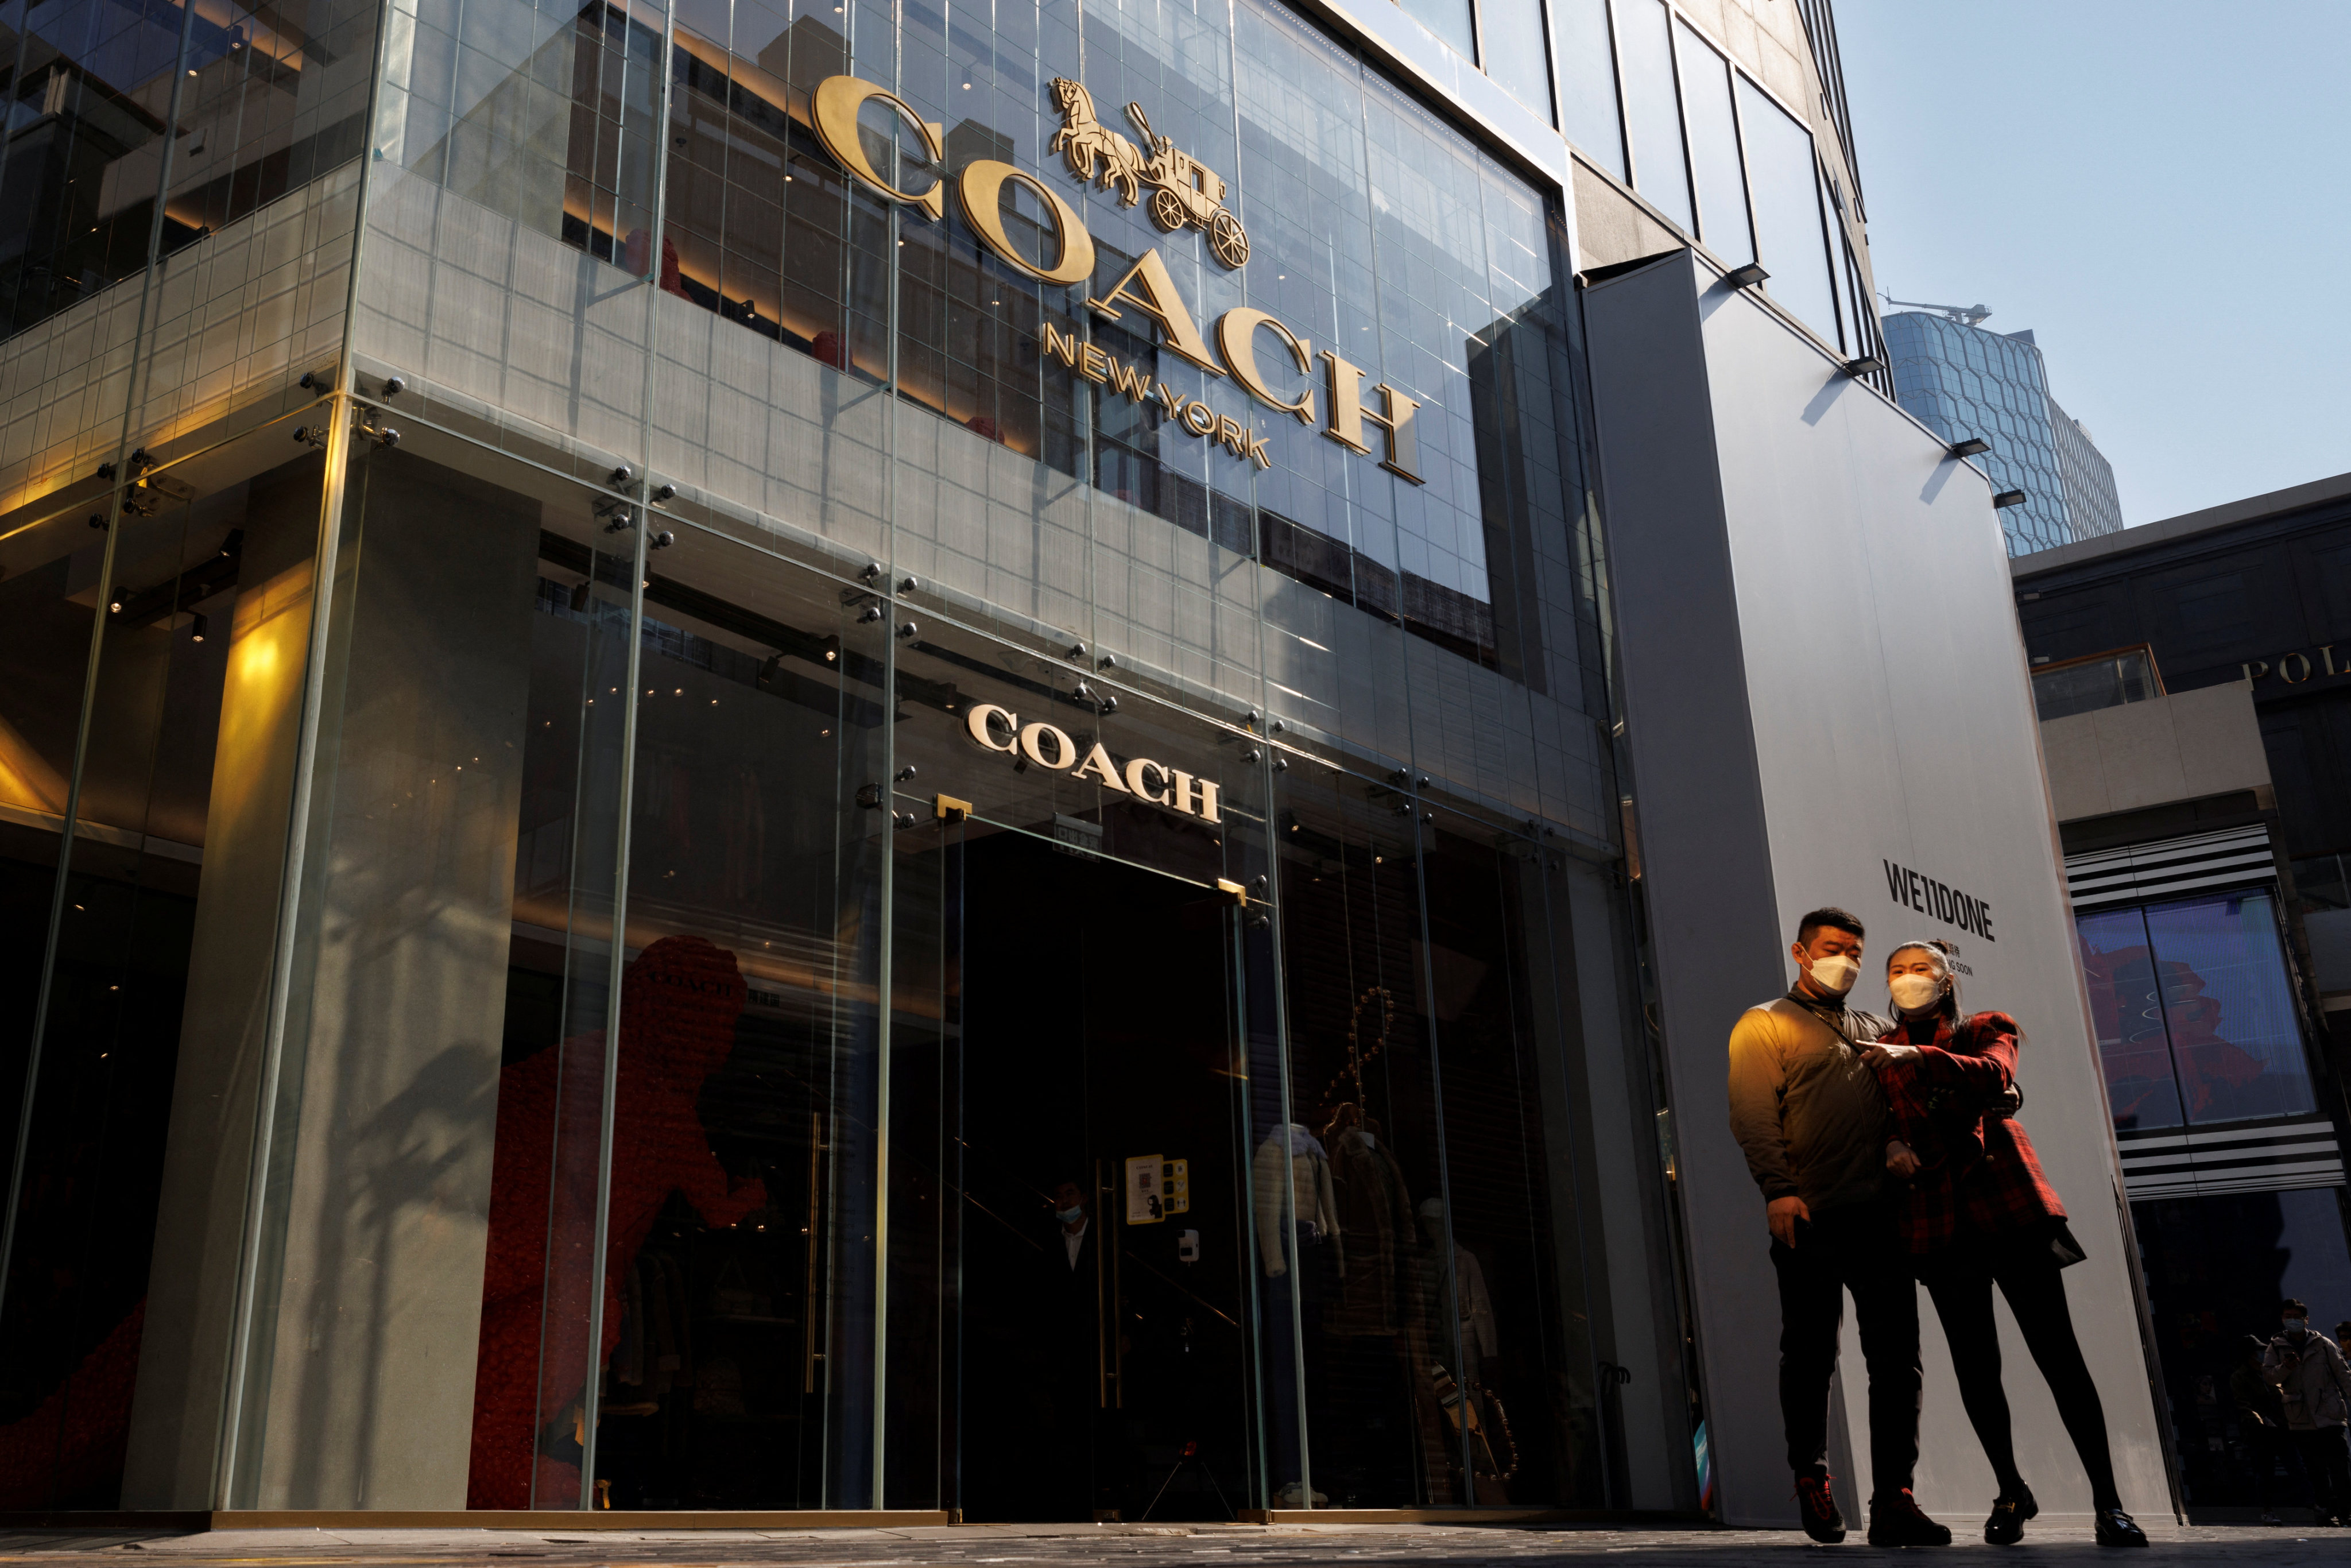 A store of the Coach luxury fashion retailer in a shopping district in Beijing, China, pictured on October 19, 2022. Photo: Thomas Peter